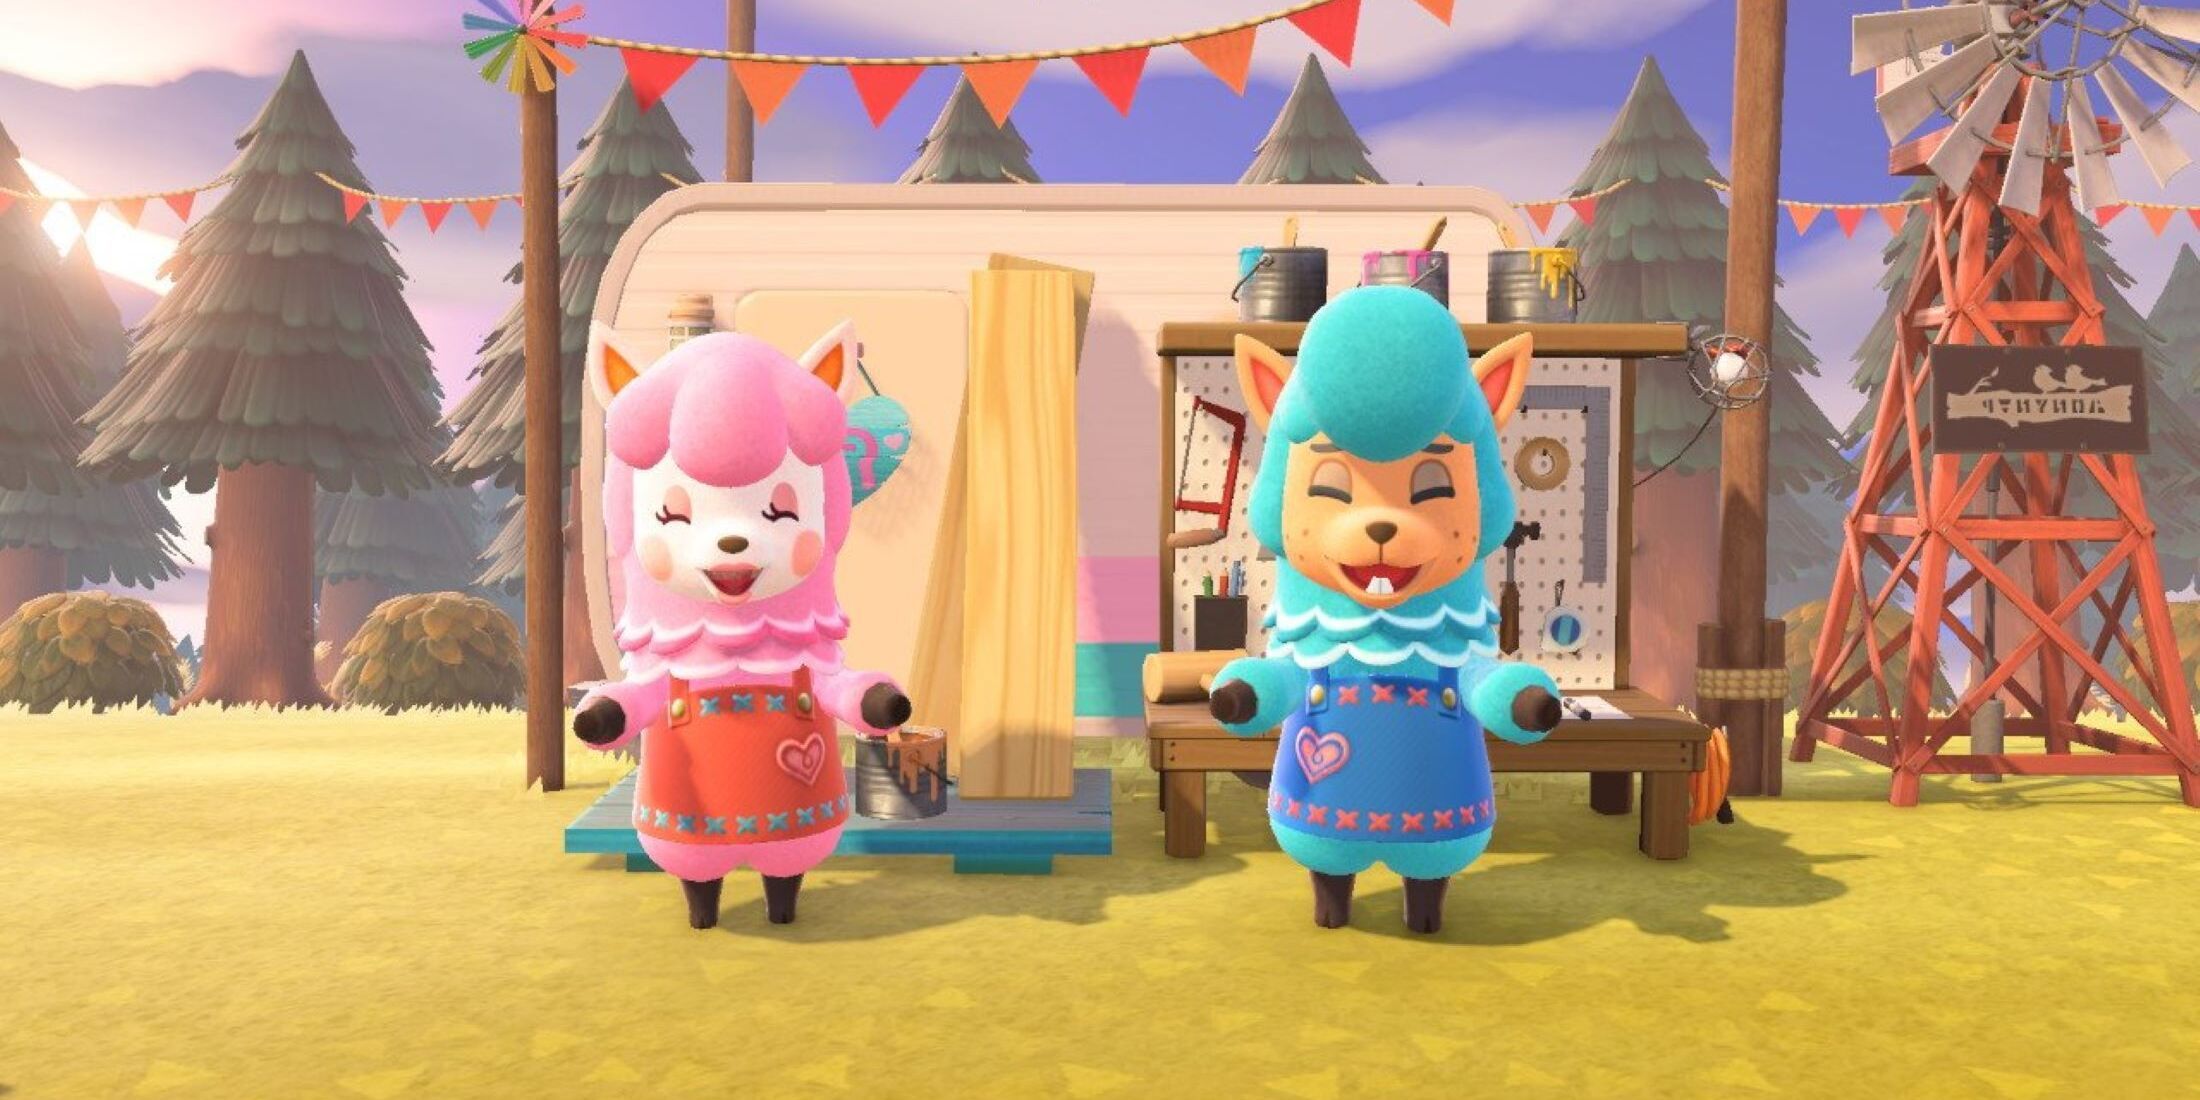 One Activity Would Be a Logical Progression For Animal Crossing's Cutest Couple